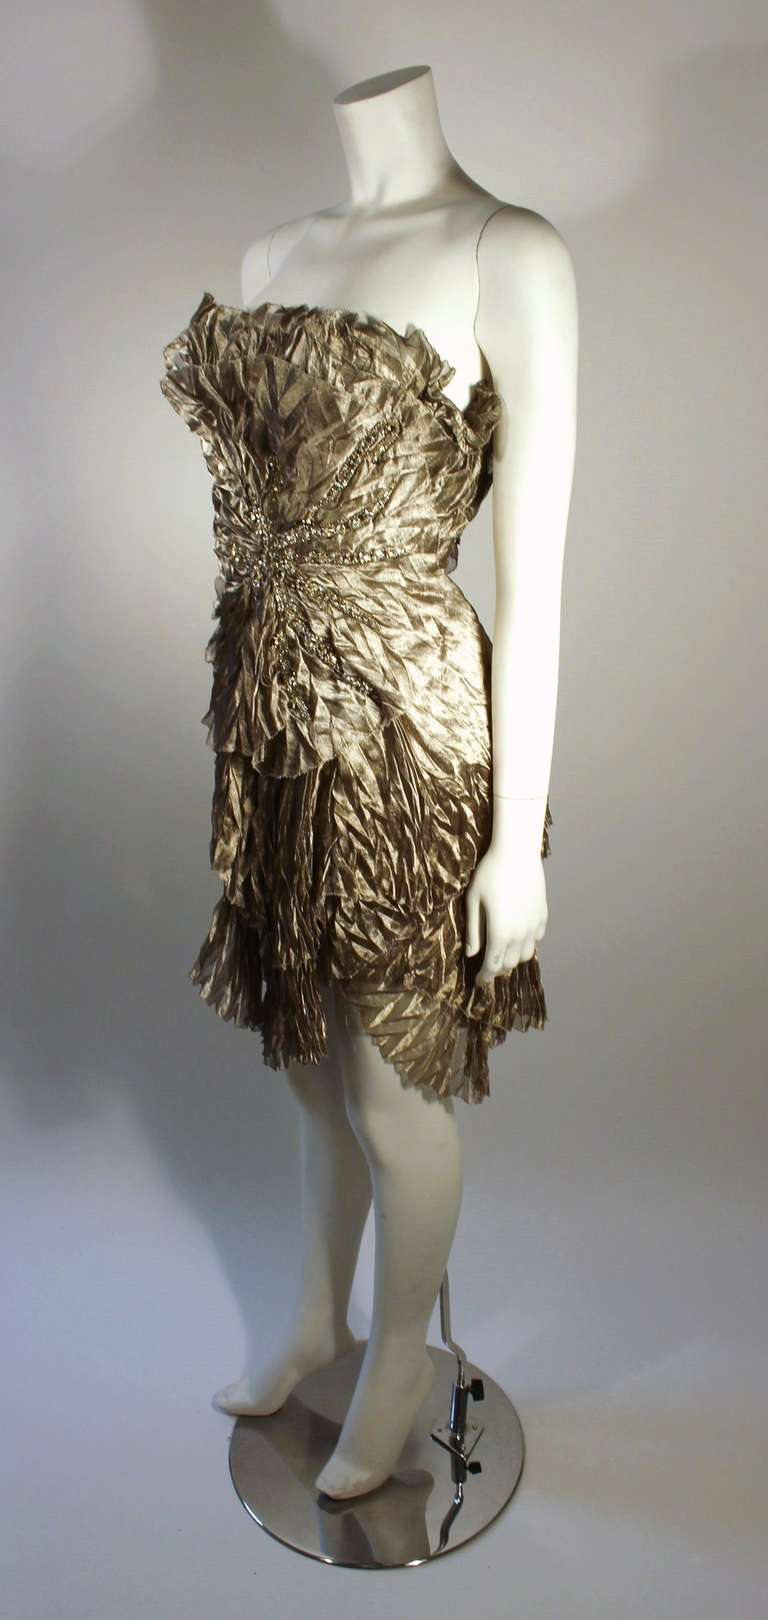 This is an exceptionally designed dress by Marchesa. The antique silver coloring is complimented by a rhinestone side burst, and hand finishing.  

Marked size 2
Measurements (Approximate):
Length: 23.5